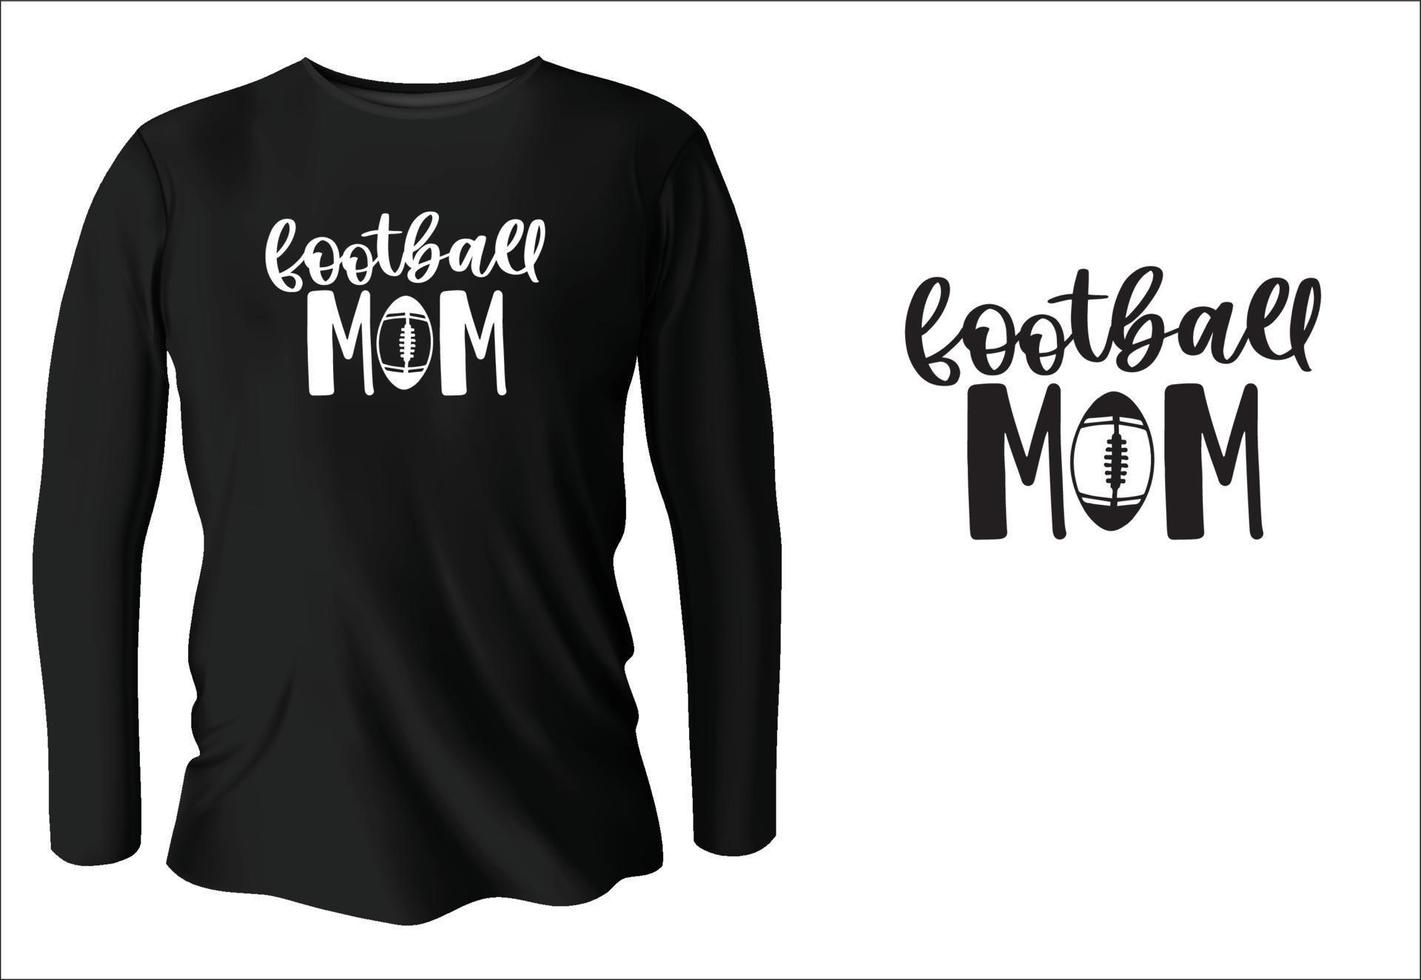 football mom t-shirt design with vector